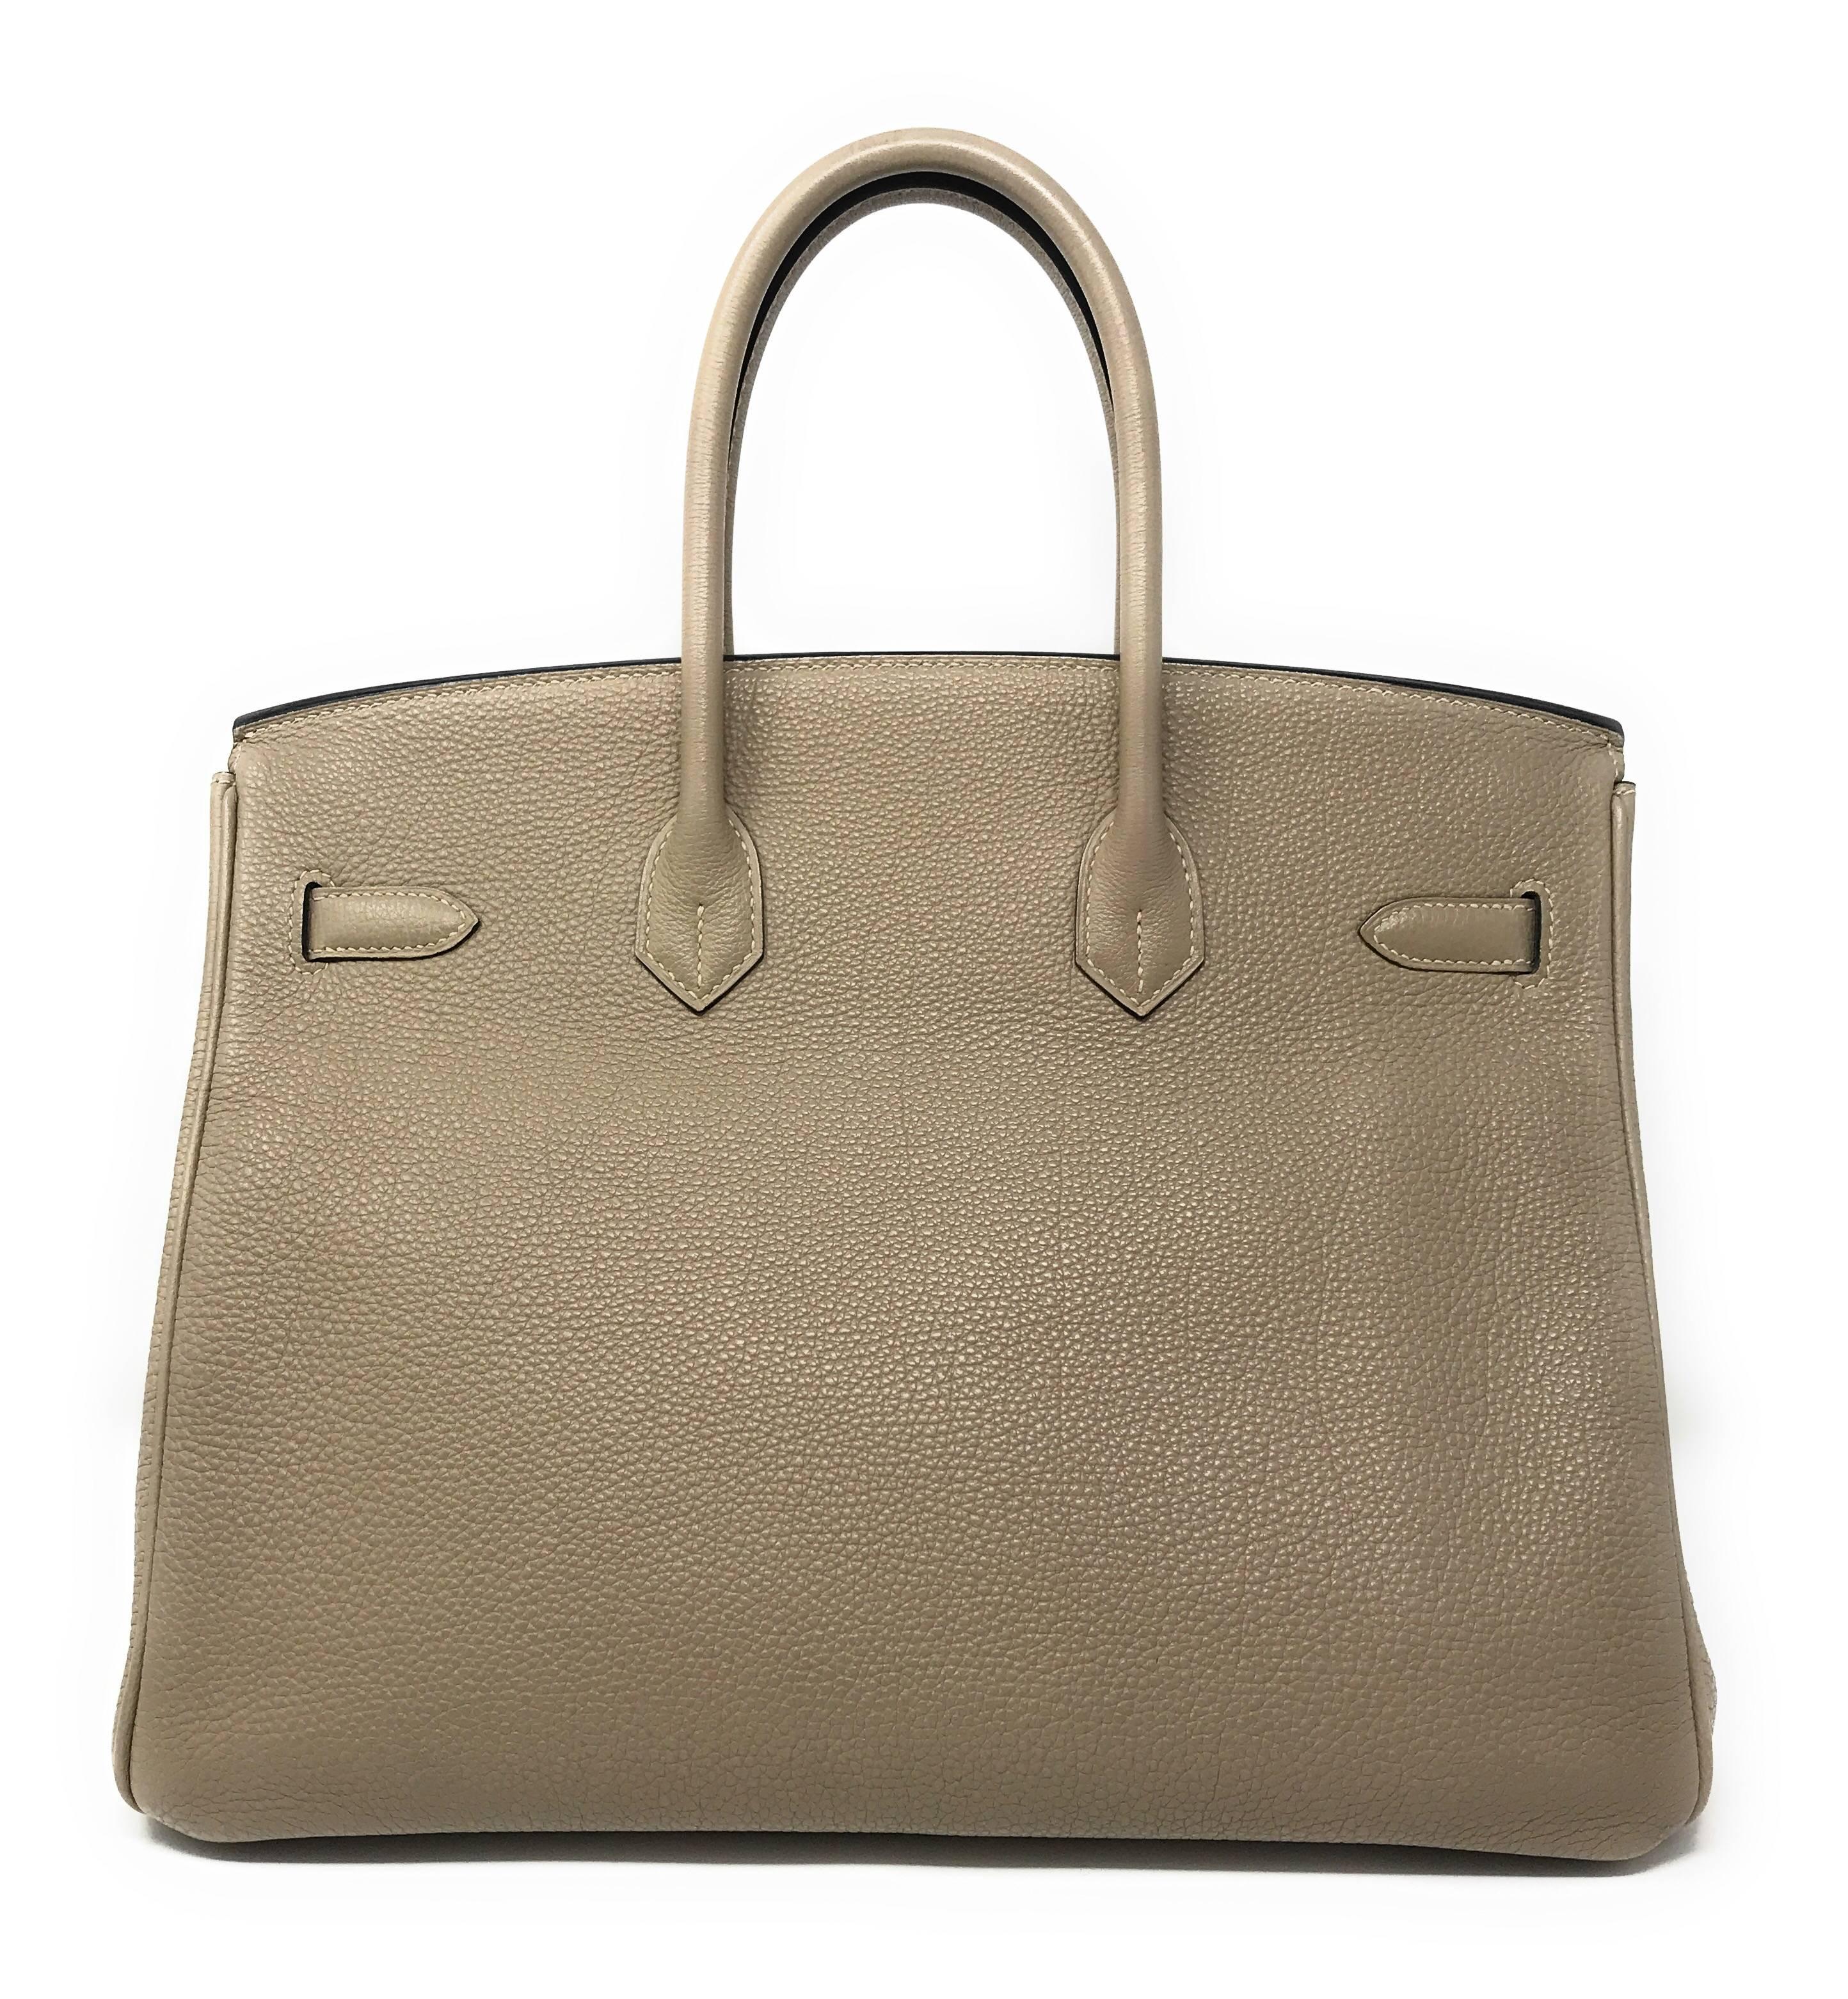 Hermes Gris Tourterelle, Turtle Dove Grey, is a mix of grey, beige, and taupe.
A true neutral that seems to change its tone and shade depending on the color of clothing it’s accessorized with.

This 35cm Birkin is crafted in Hermes Togo leather